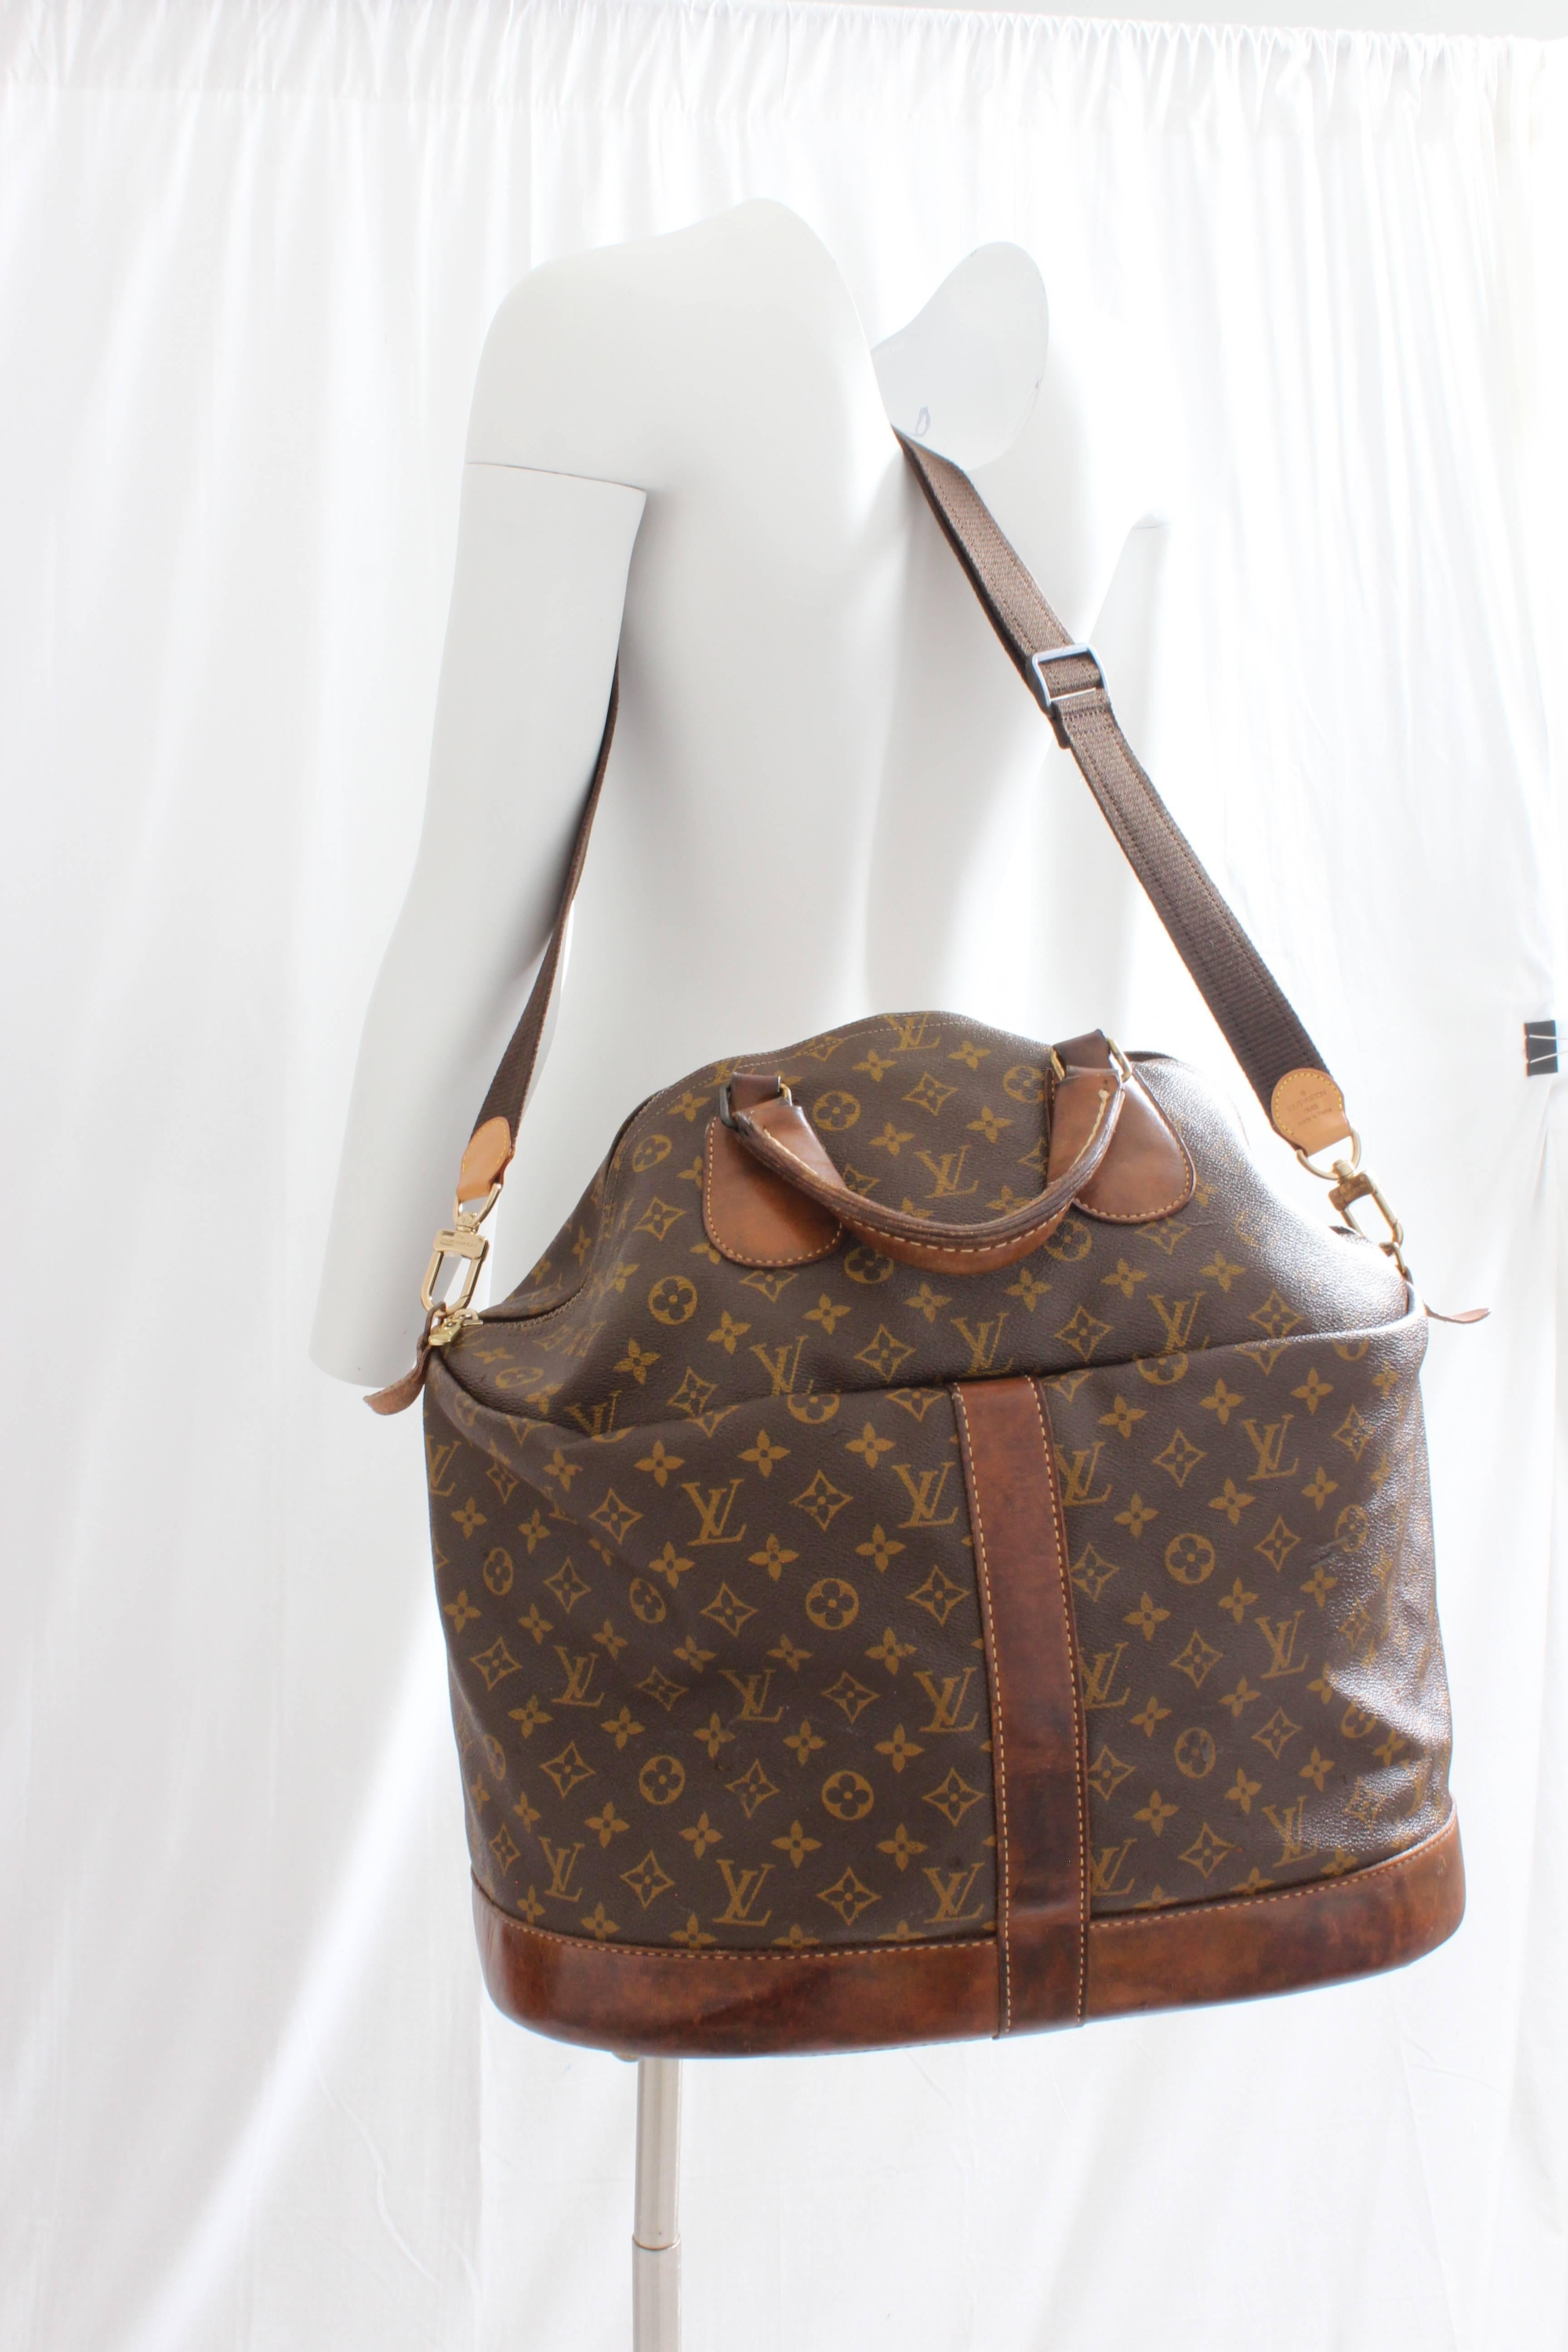 Louis Vuitton Large Steamer Bag Keepall Monogram Travel Tote French Company 70er Jahre 6